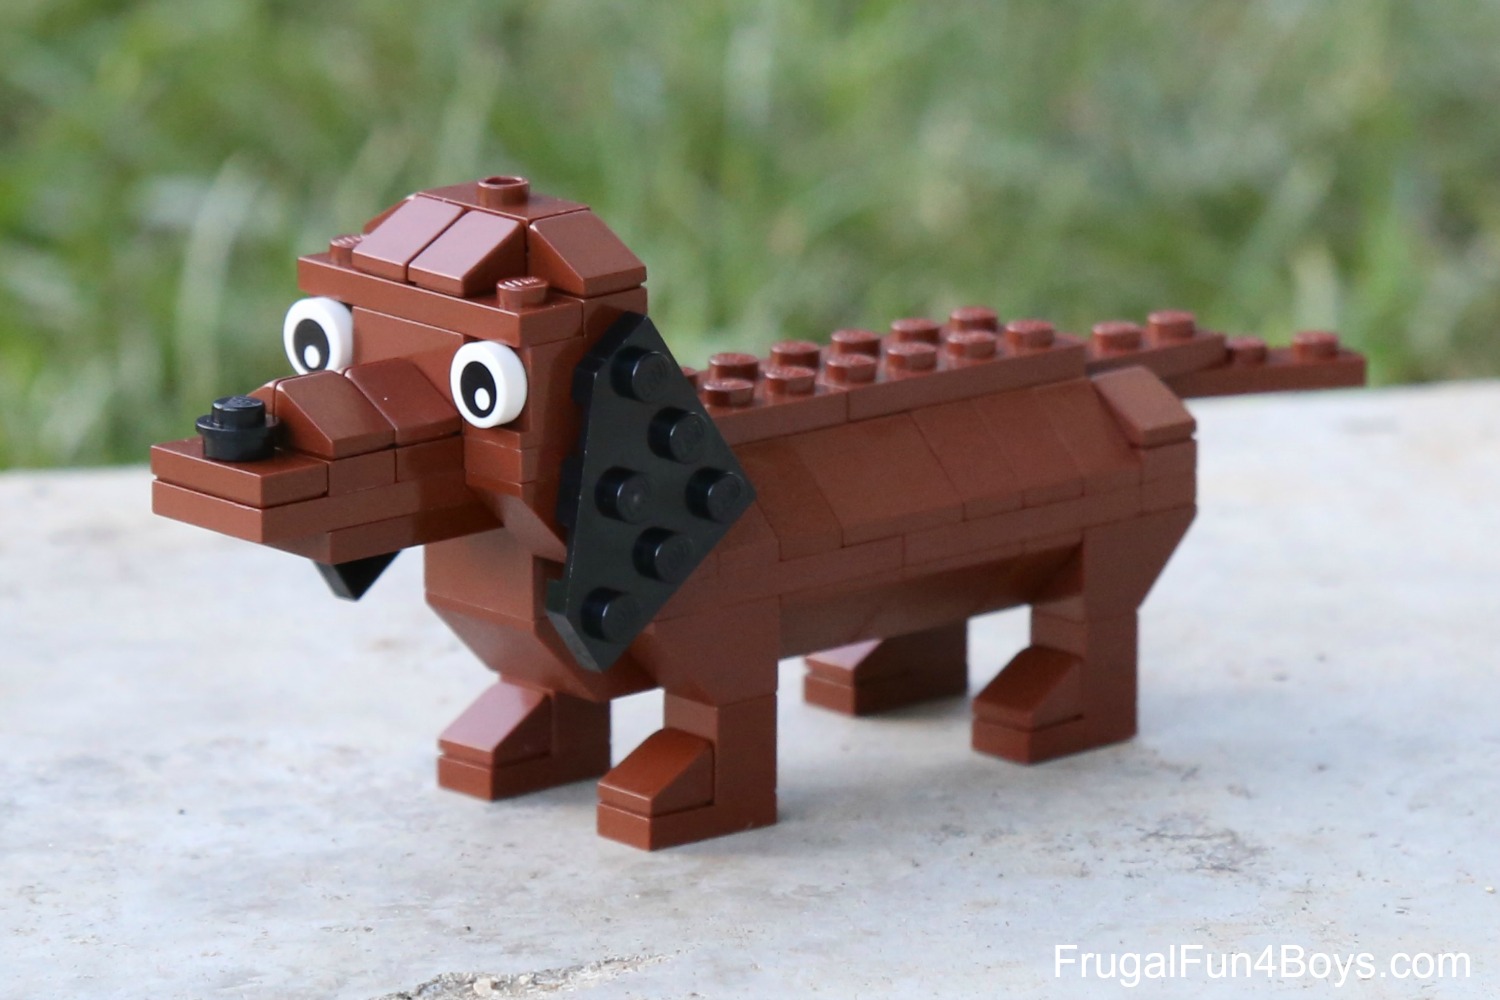 More LEGO Dogs! Dachshund and Mastiff Building Instructions